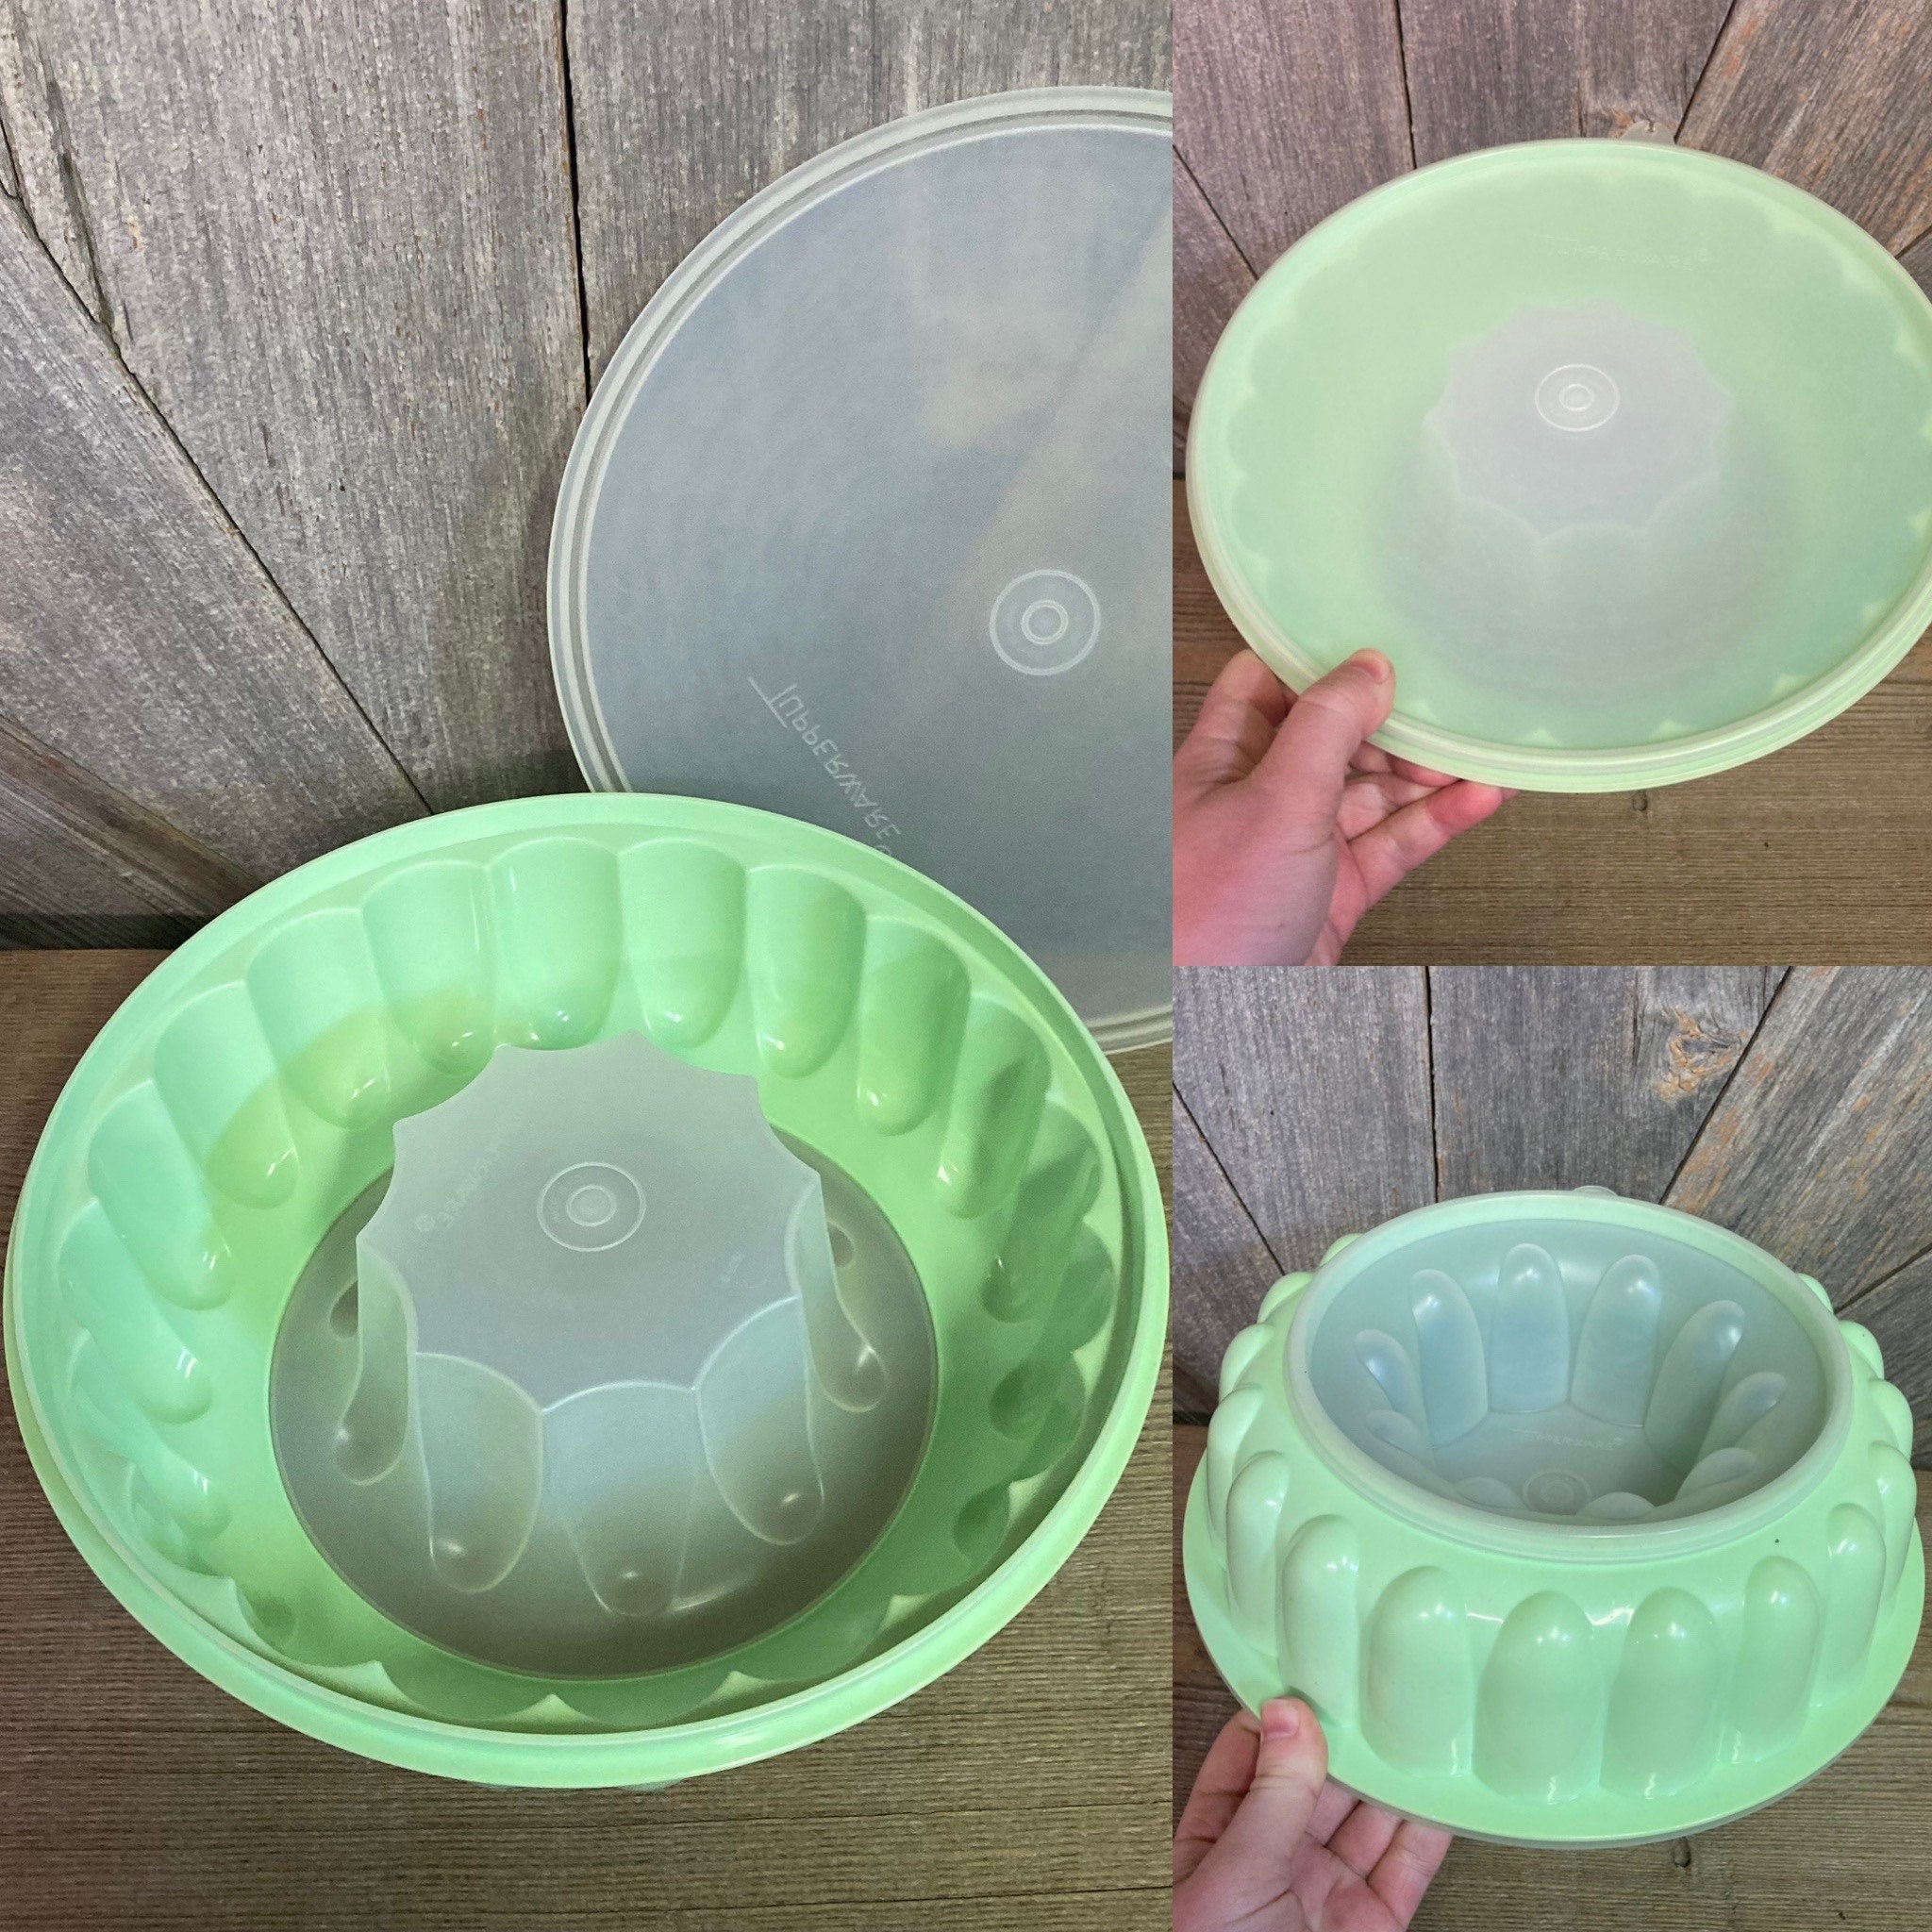 Save That Jel-Ring Mold! Why Tupperware May Be Going Away Forever